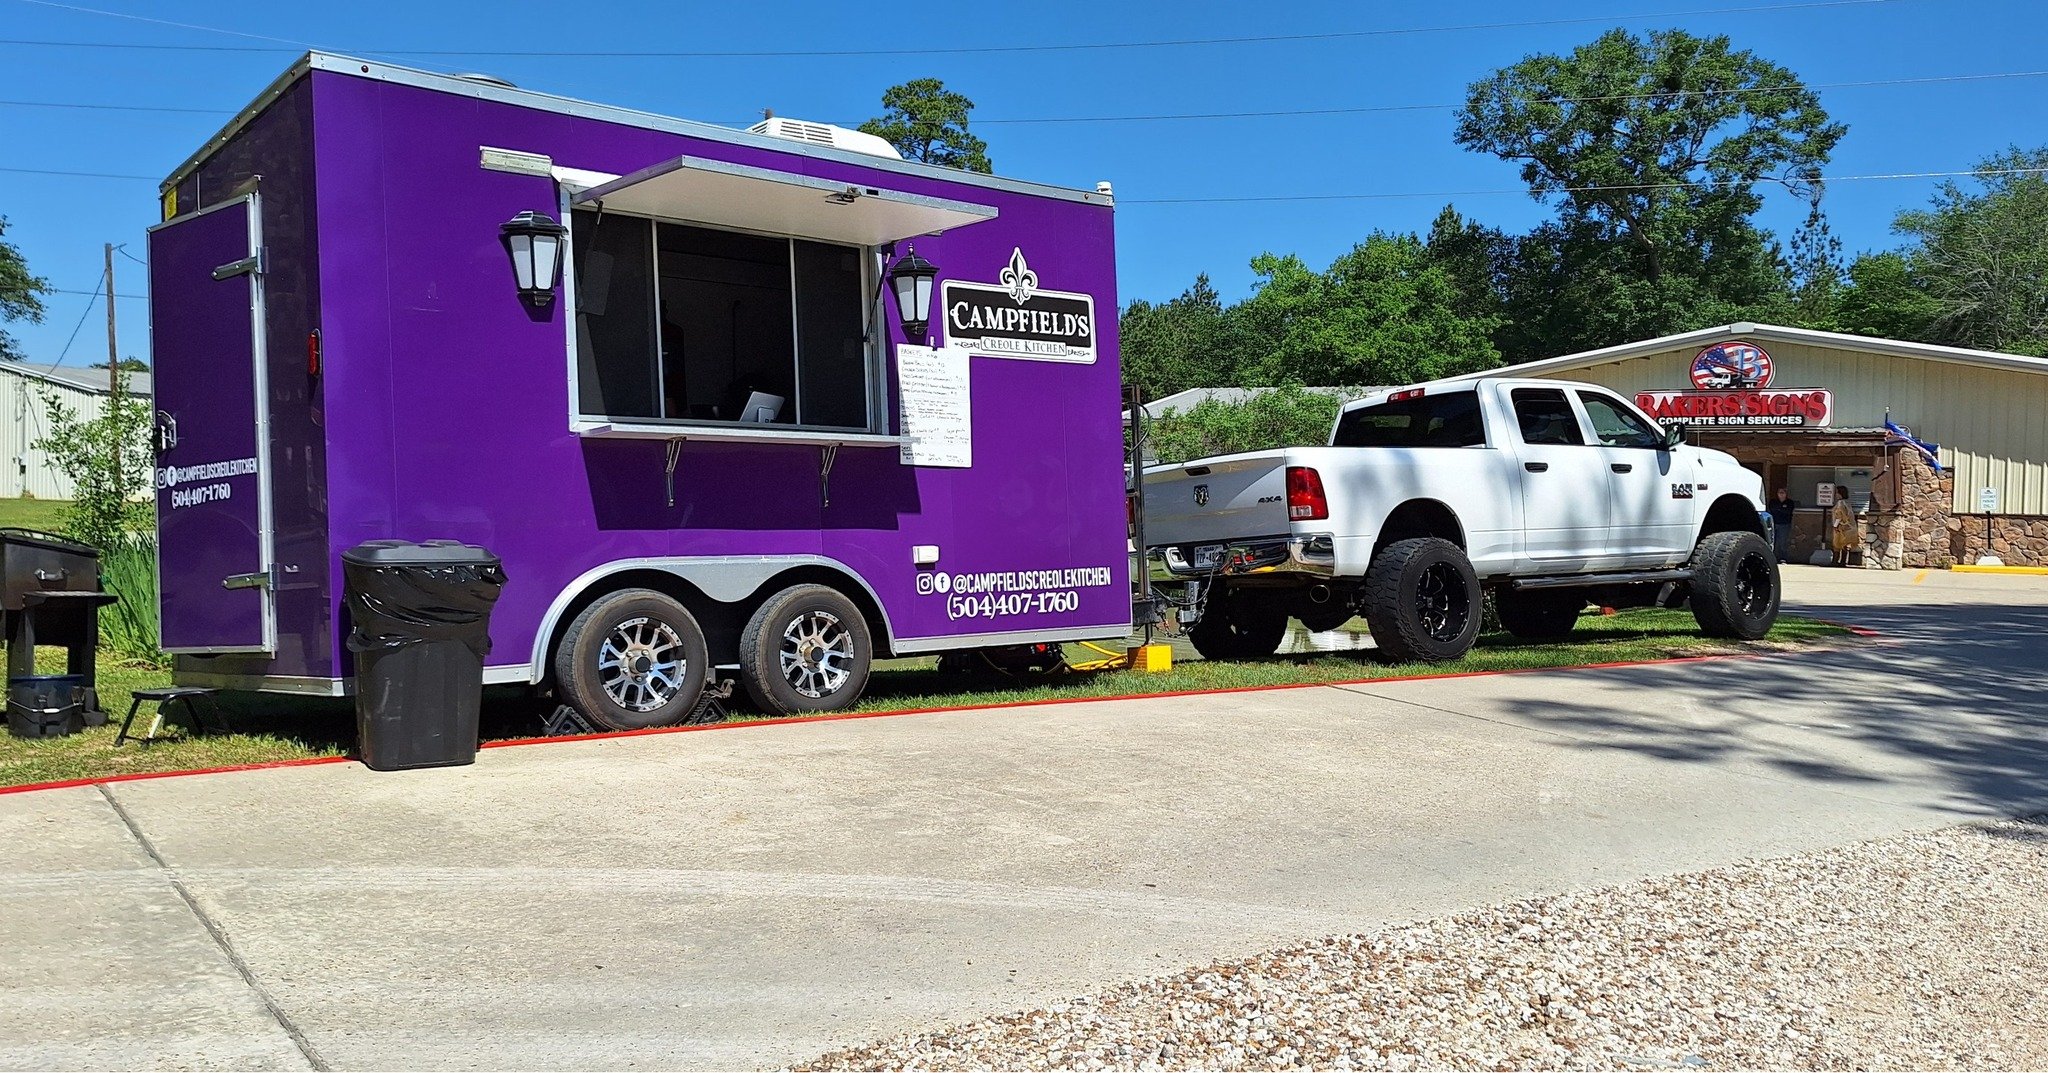 🍽️ A Huge Thank You to Campfields Creole Kitchen Food Truck for Serving Up Delicious Eats at Bakers' Signs Today! 🍽️

Your mouthwatering dishes brought smiles to our faces and satisfied our taste buds. We're grateful for the fantastic food and frie